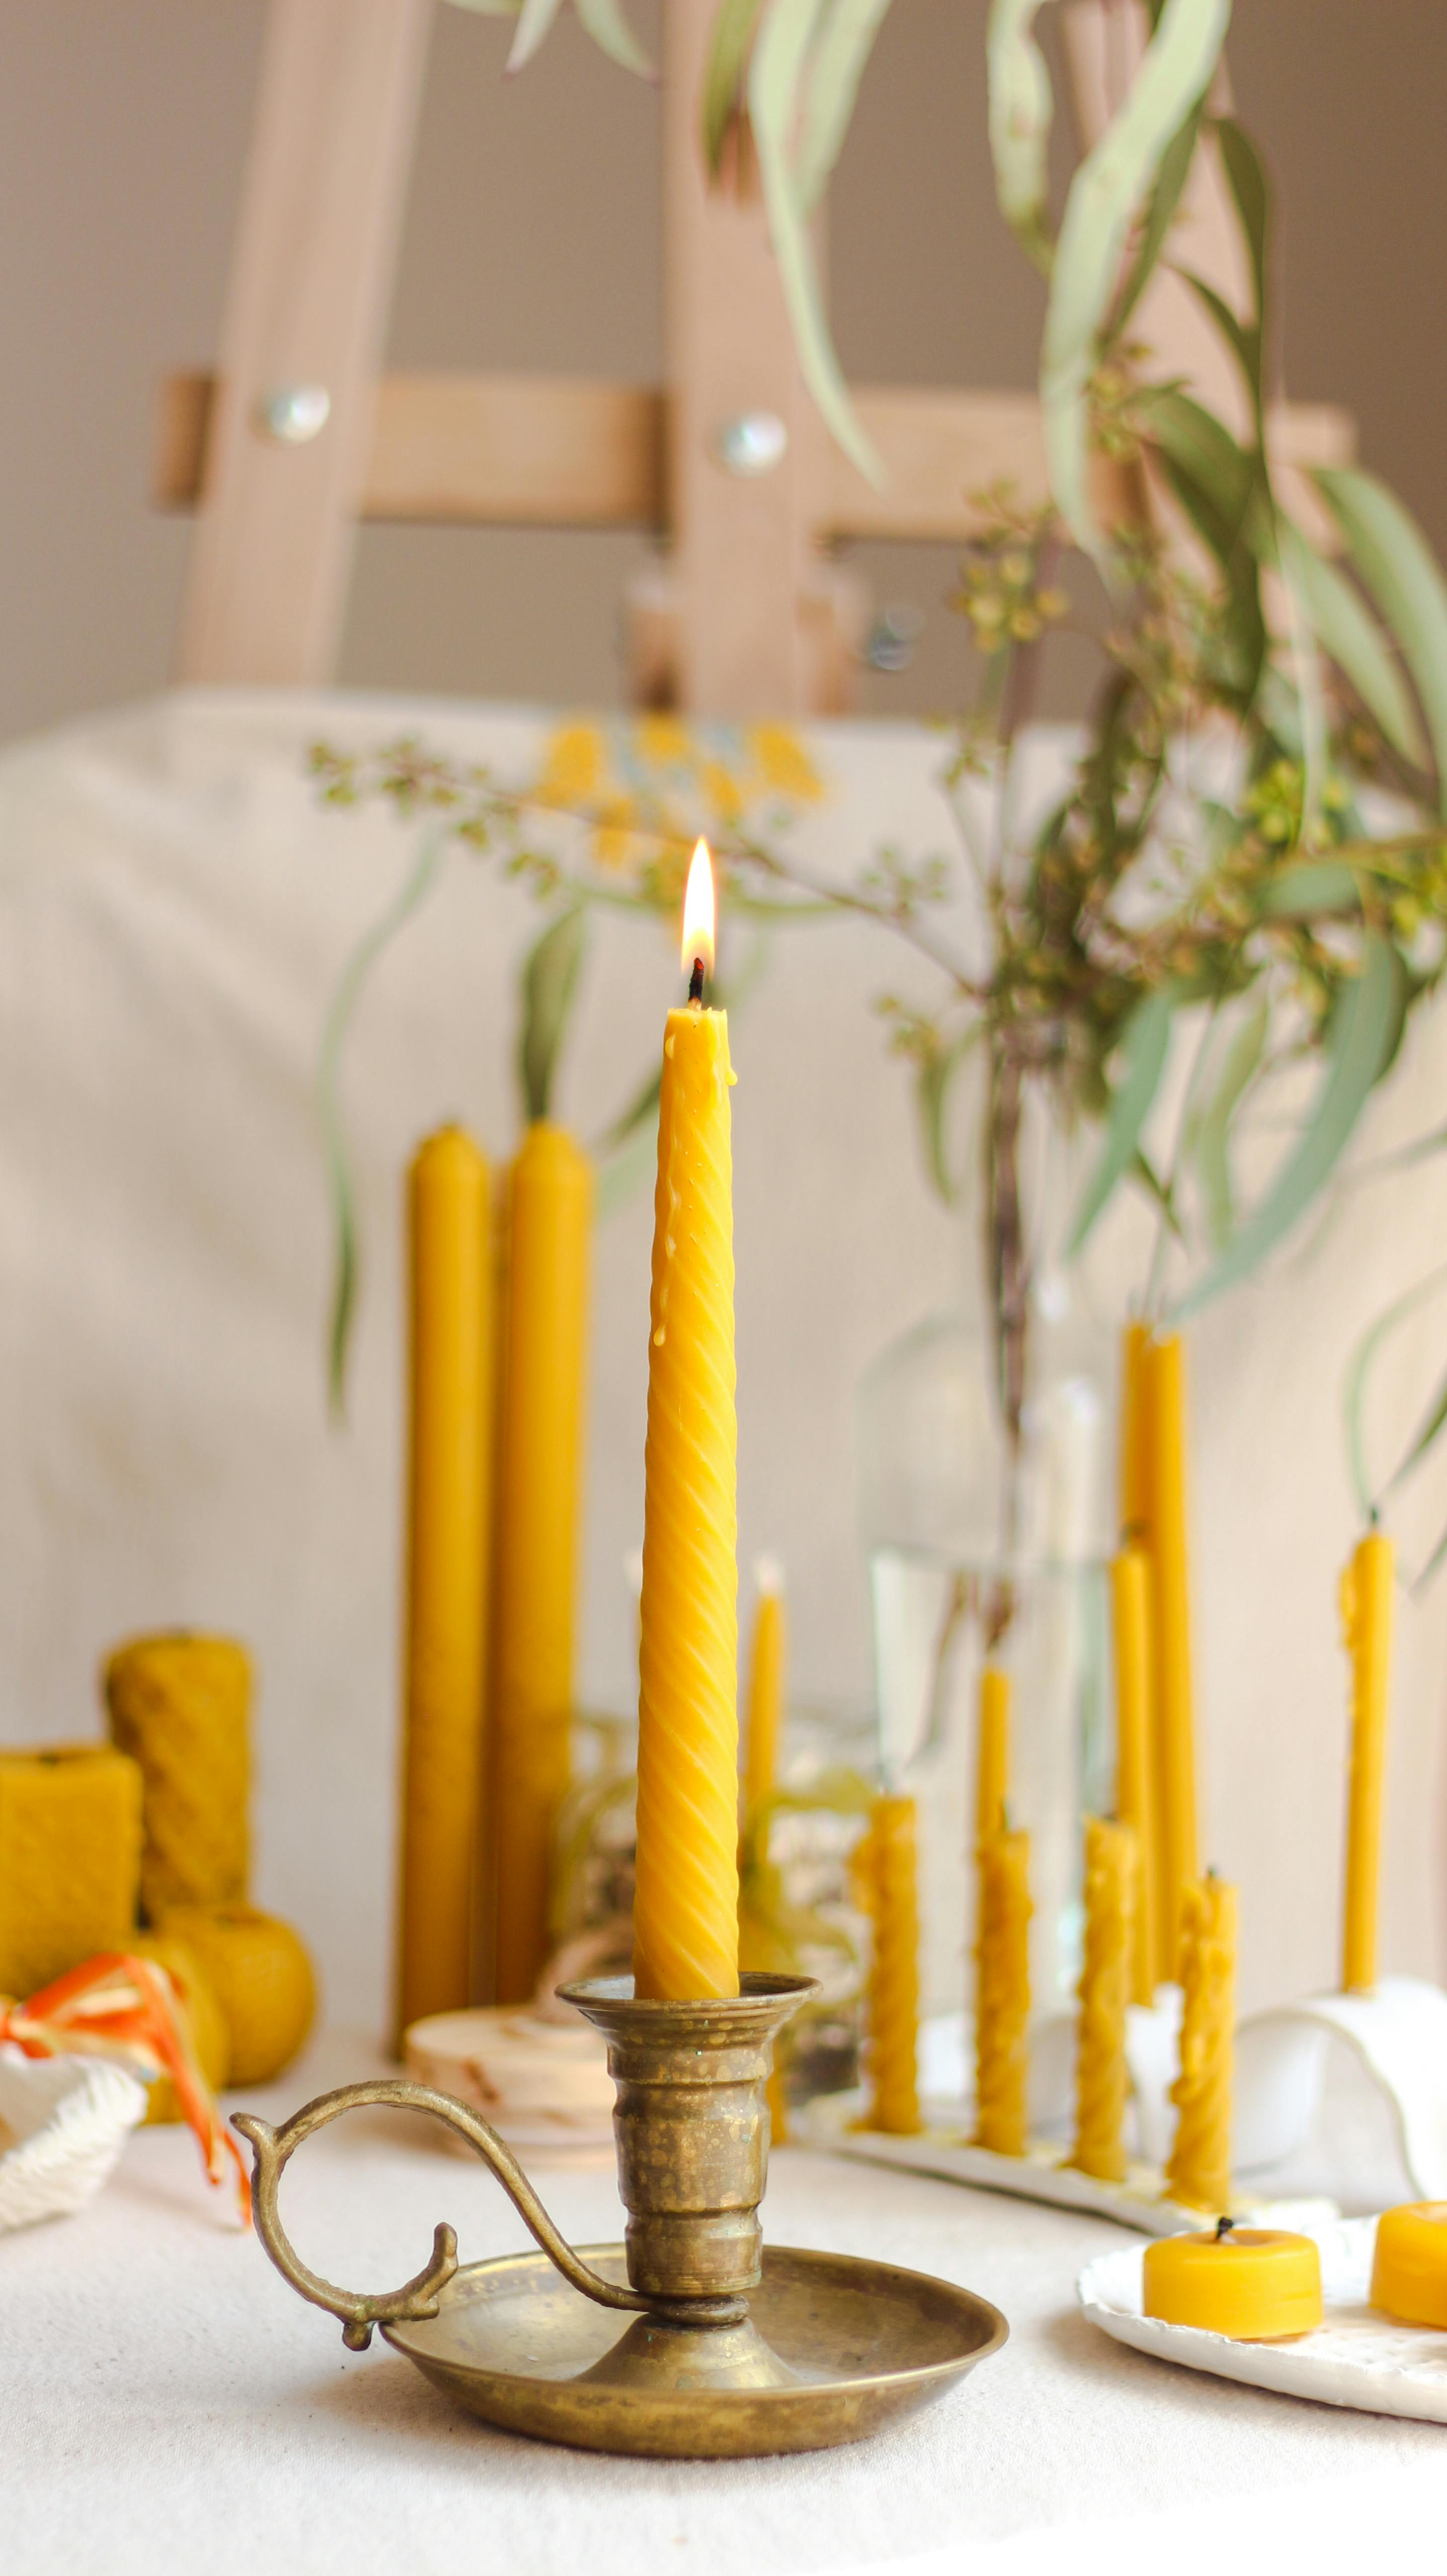 vintage candlestick with burning candle on table at home